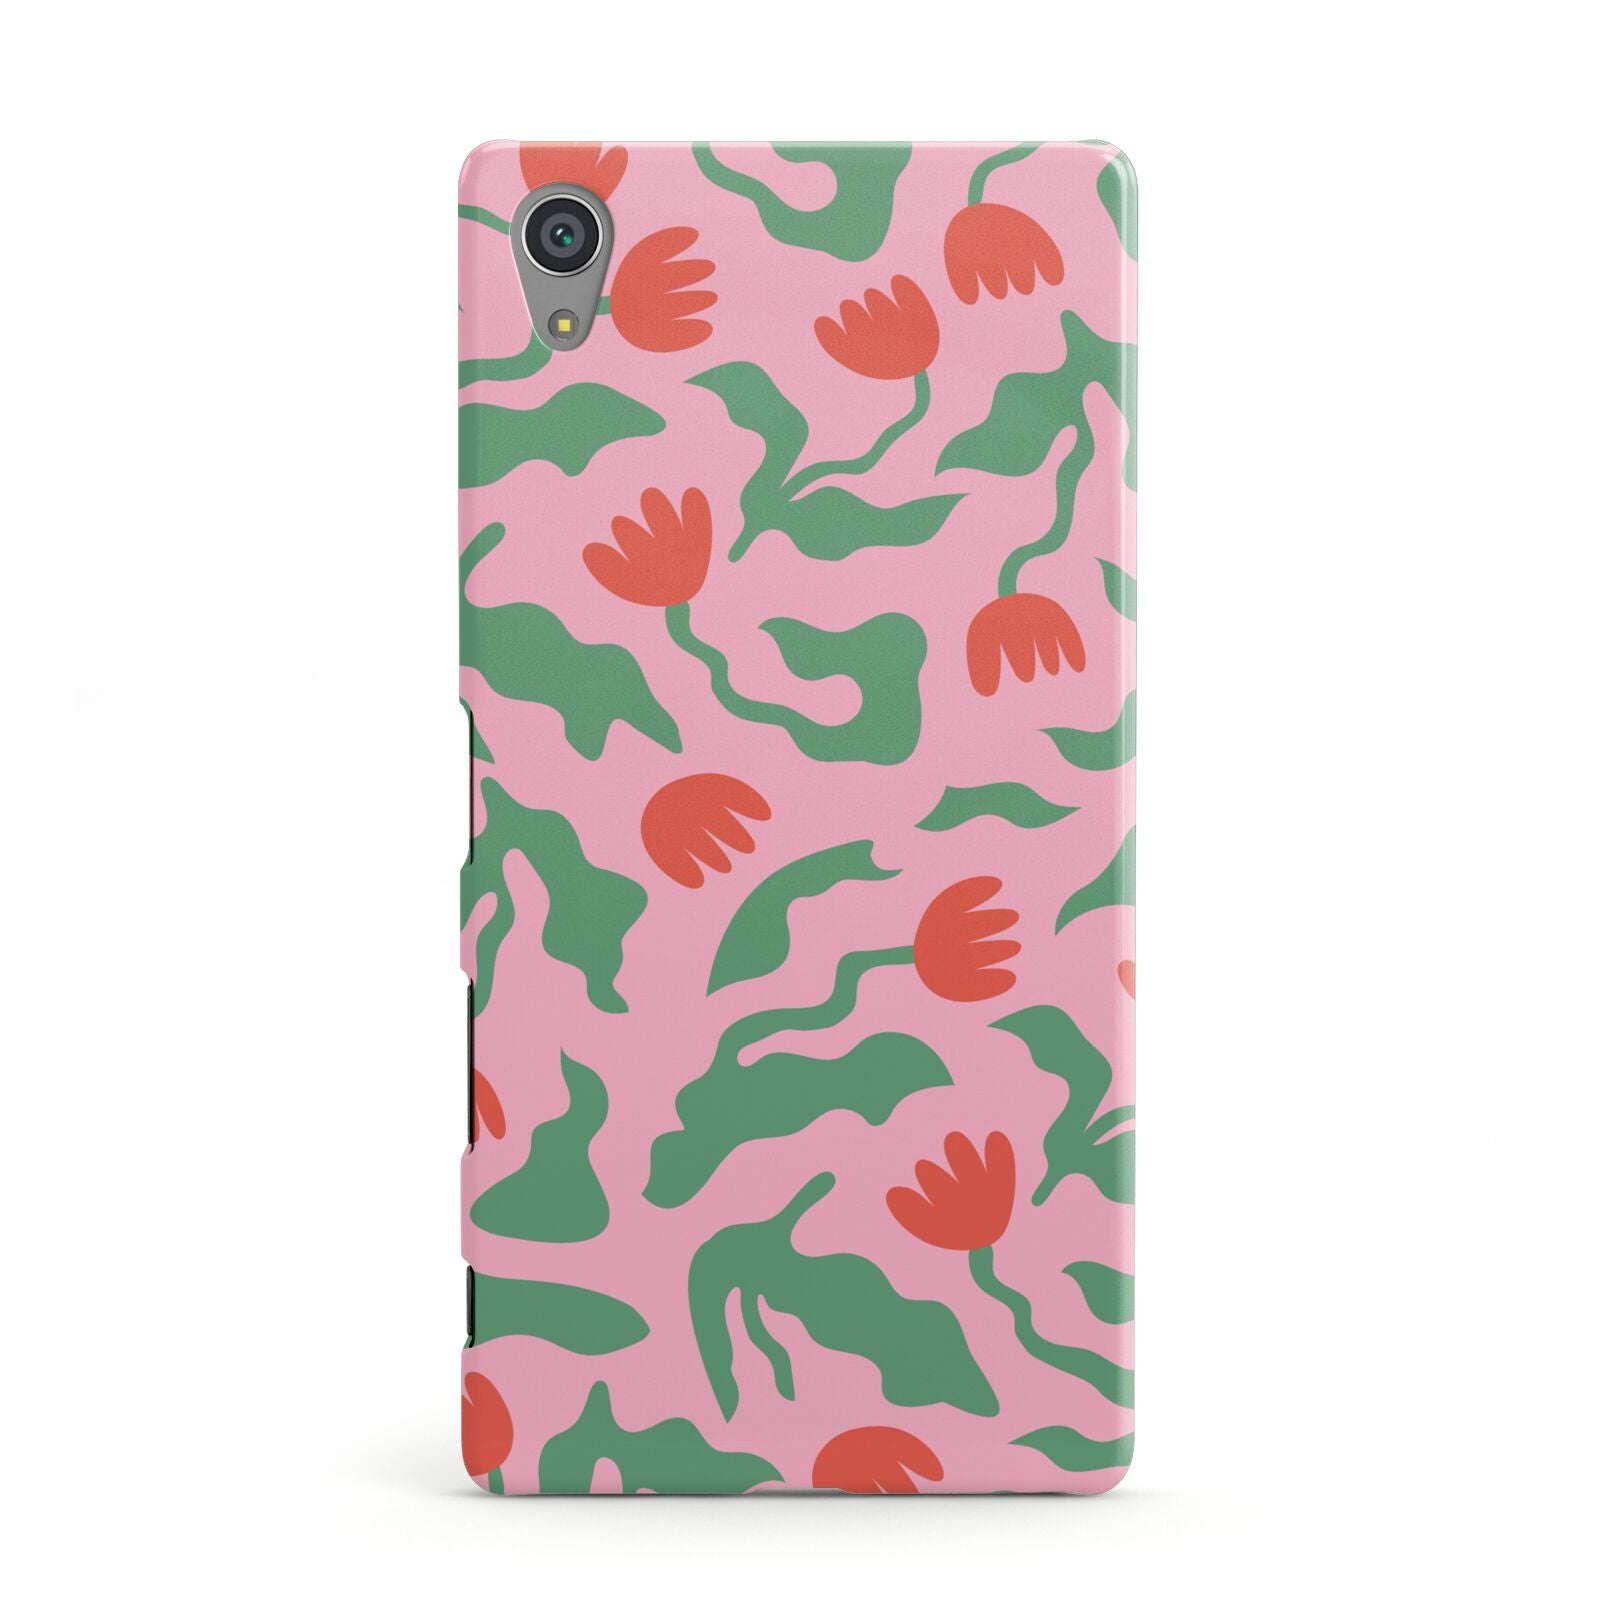 Simple Floral Sony Xperia Case